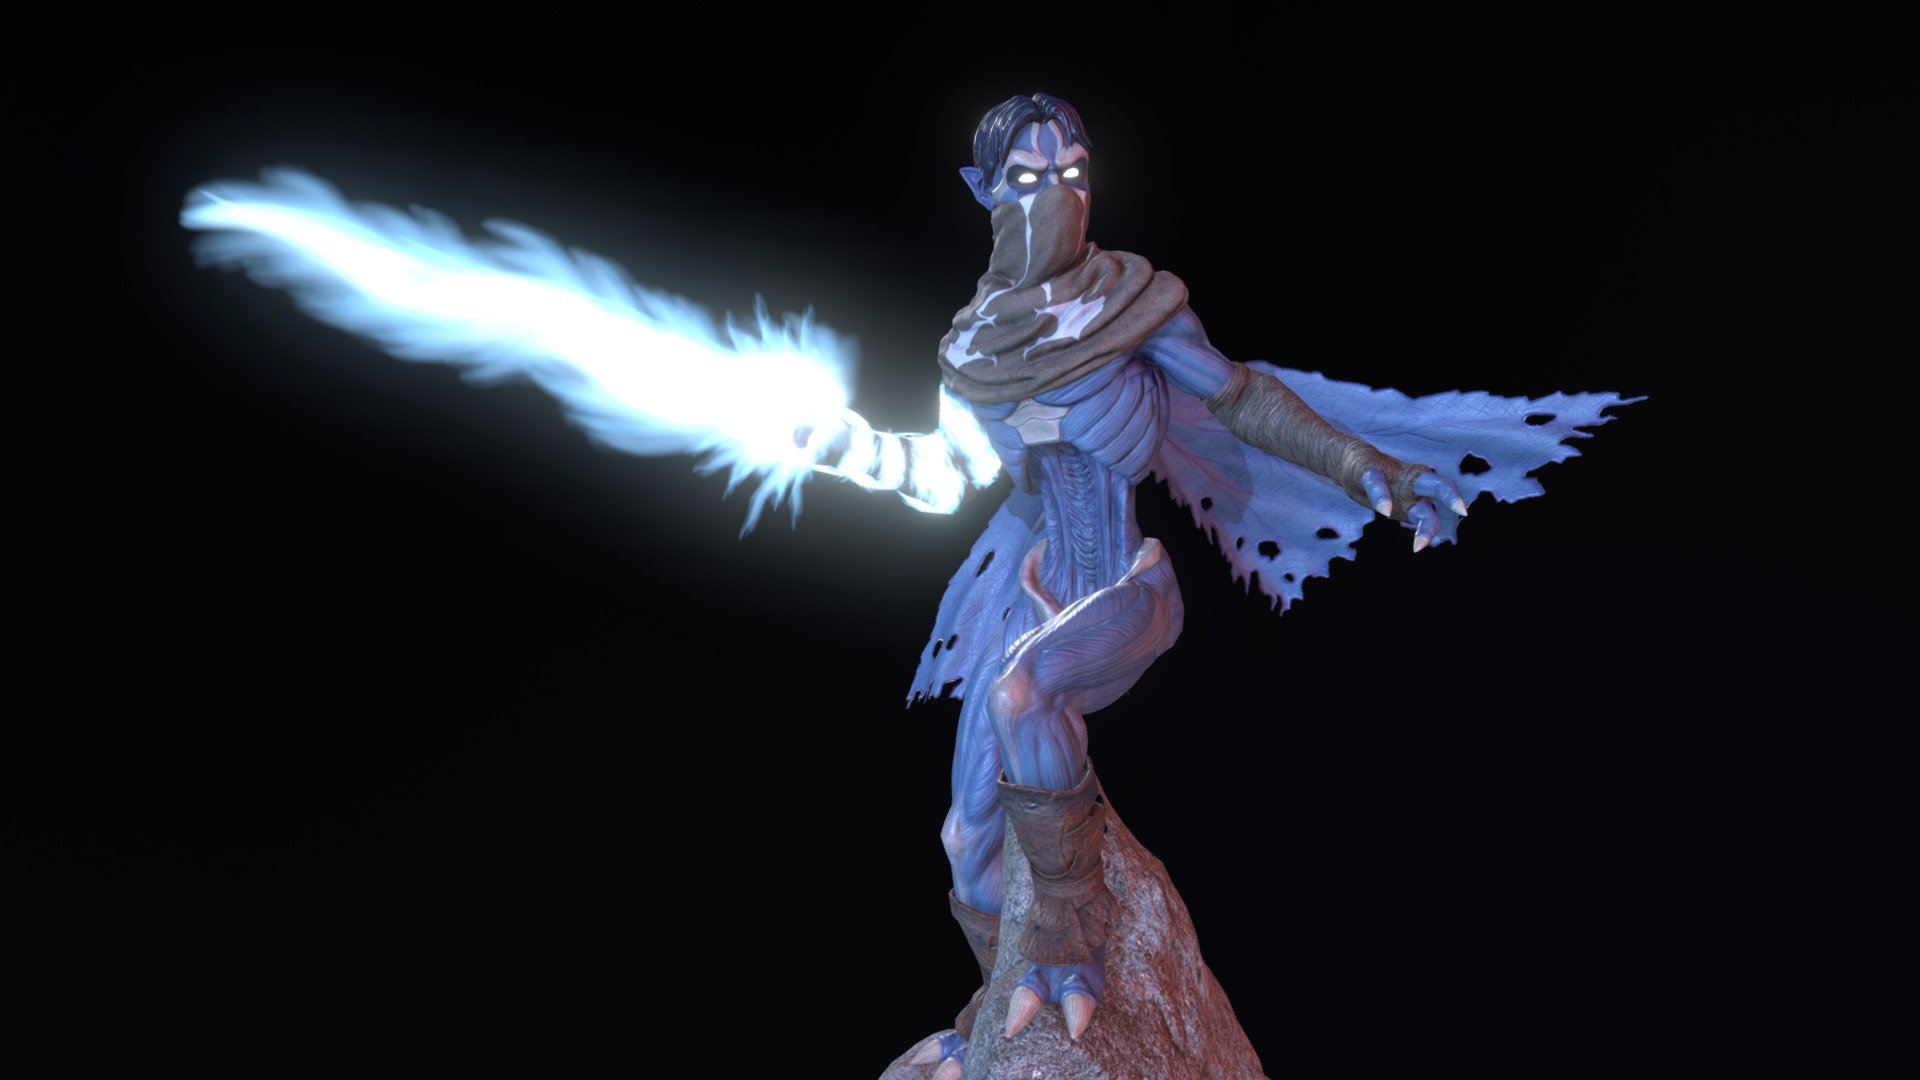 I've always loved the Soul Reaver series and have wanted to make some fan art for awhile. I tried to imagine what an HD Raziel might look like while keeping it close to the original designs. It was a lot of fun to work on, and I hope you enjoy looking at it! - Soul Reaver - Raziel - 3D model by ADANDrPepper 3d model